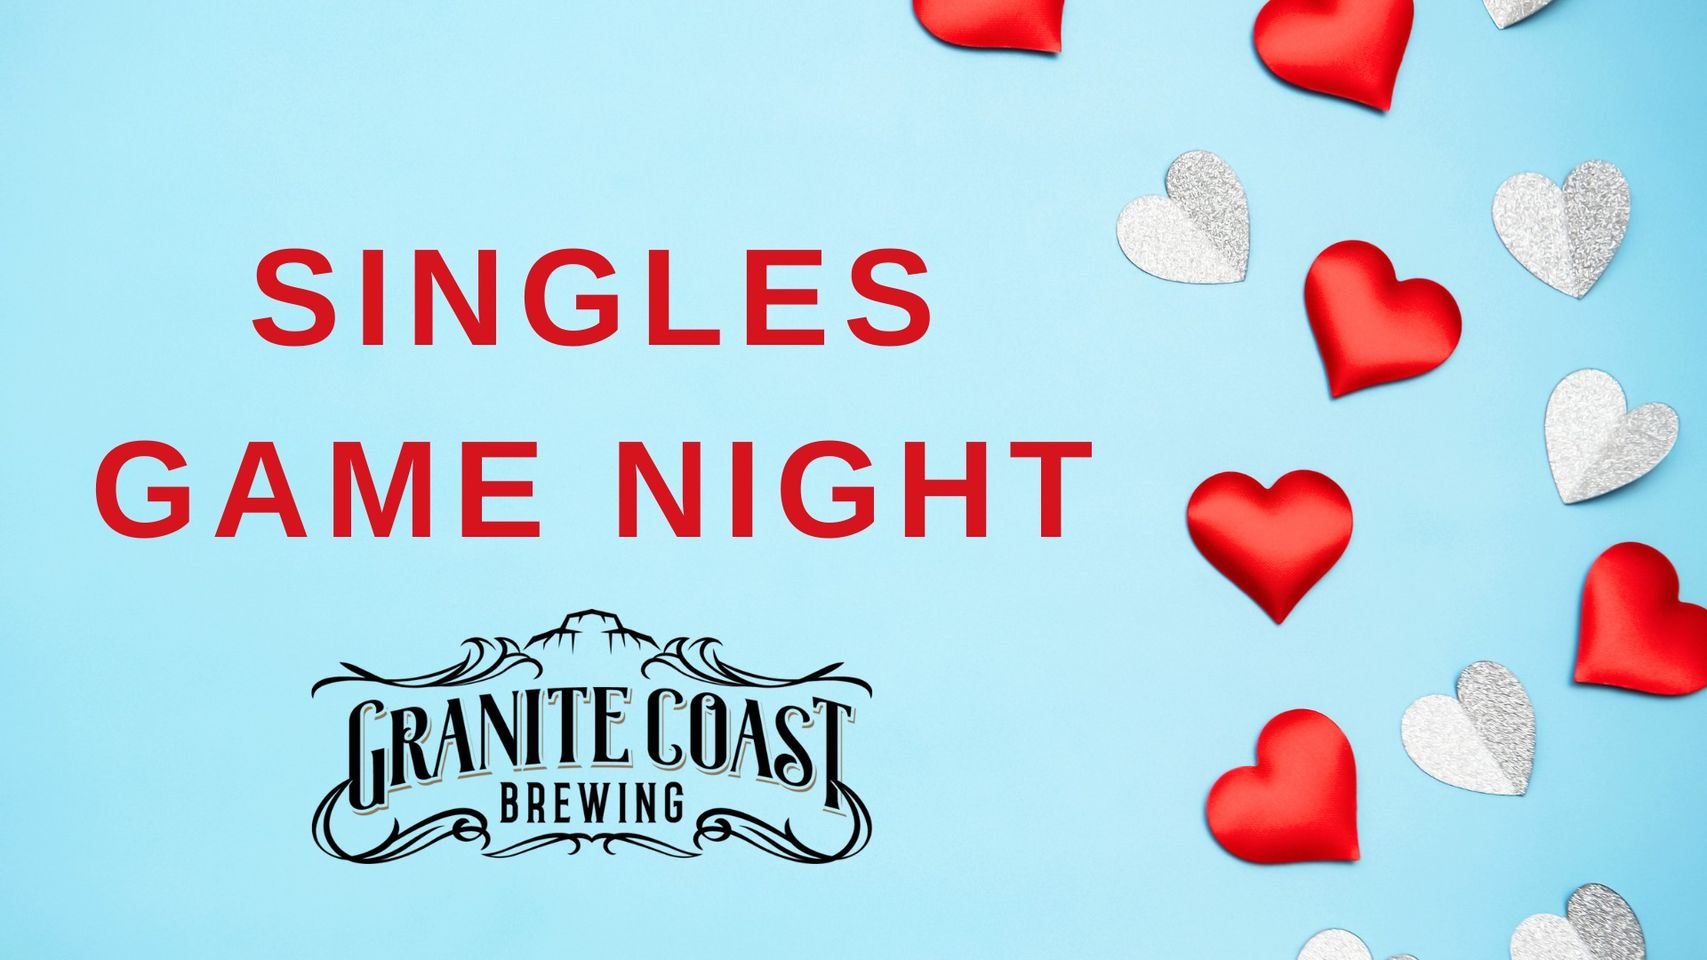 Join us for a fun "singles game night" at Granite Coast Brewing! The blue background featuring our logo is brilliantly accented by twinkling red and silver hearts. This exciting event promises to be a great way to meet new people over your favourite games and our handcrafted beers.